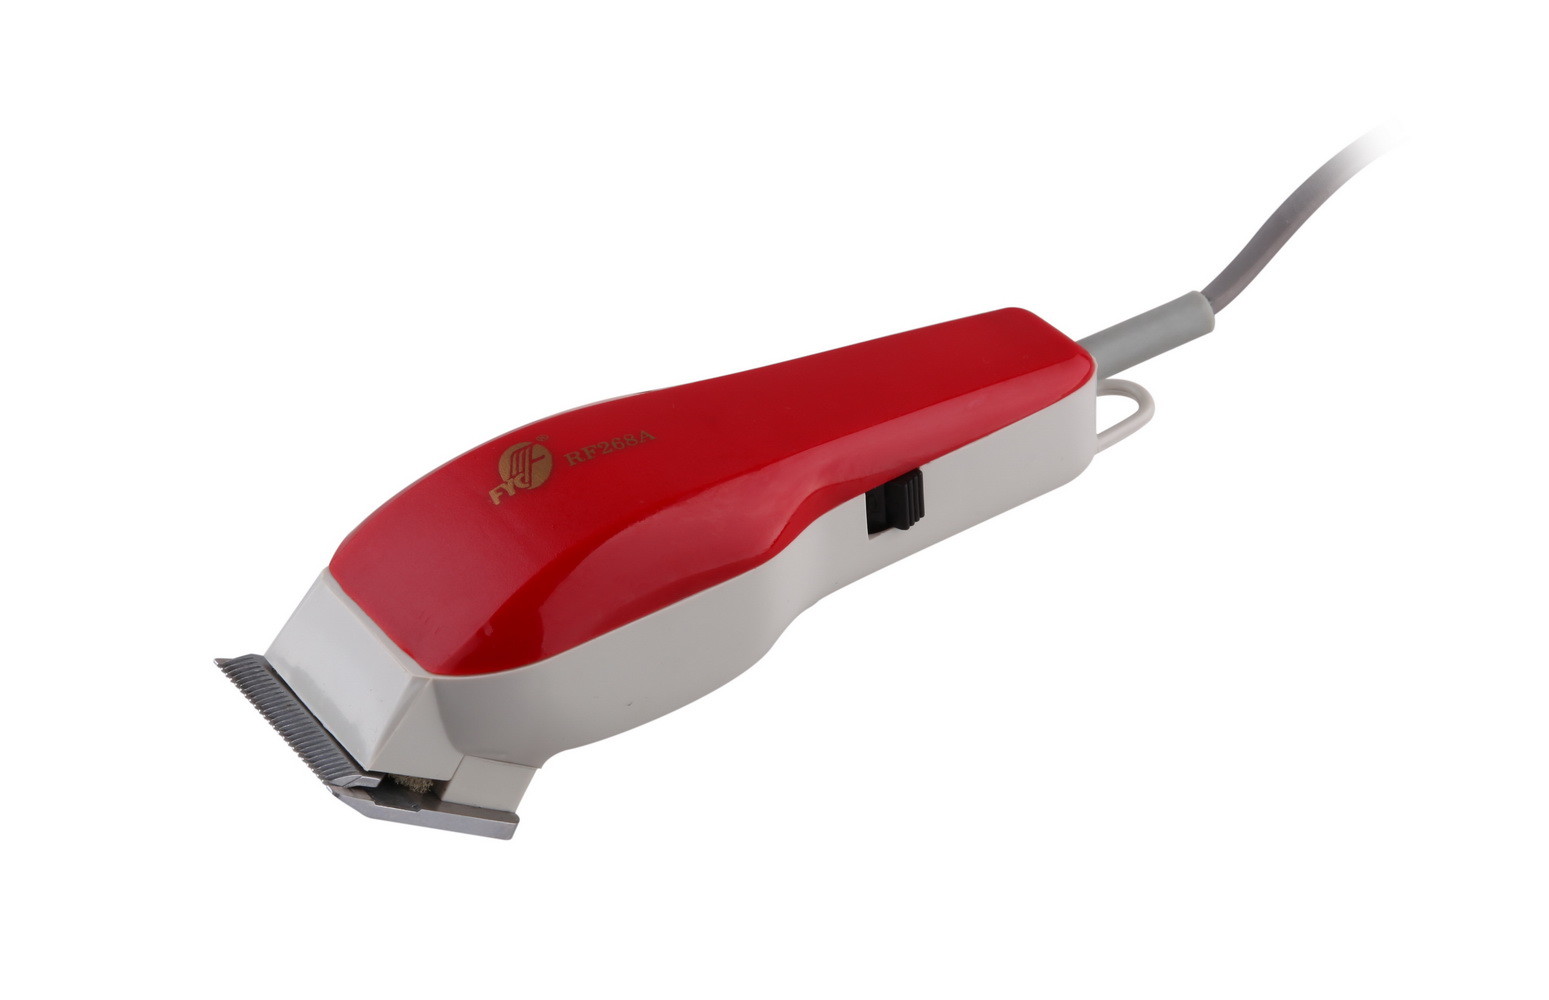 Red 10W Commercial Barber Shop Clippers Durable Mini Manual Shape RF268A